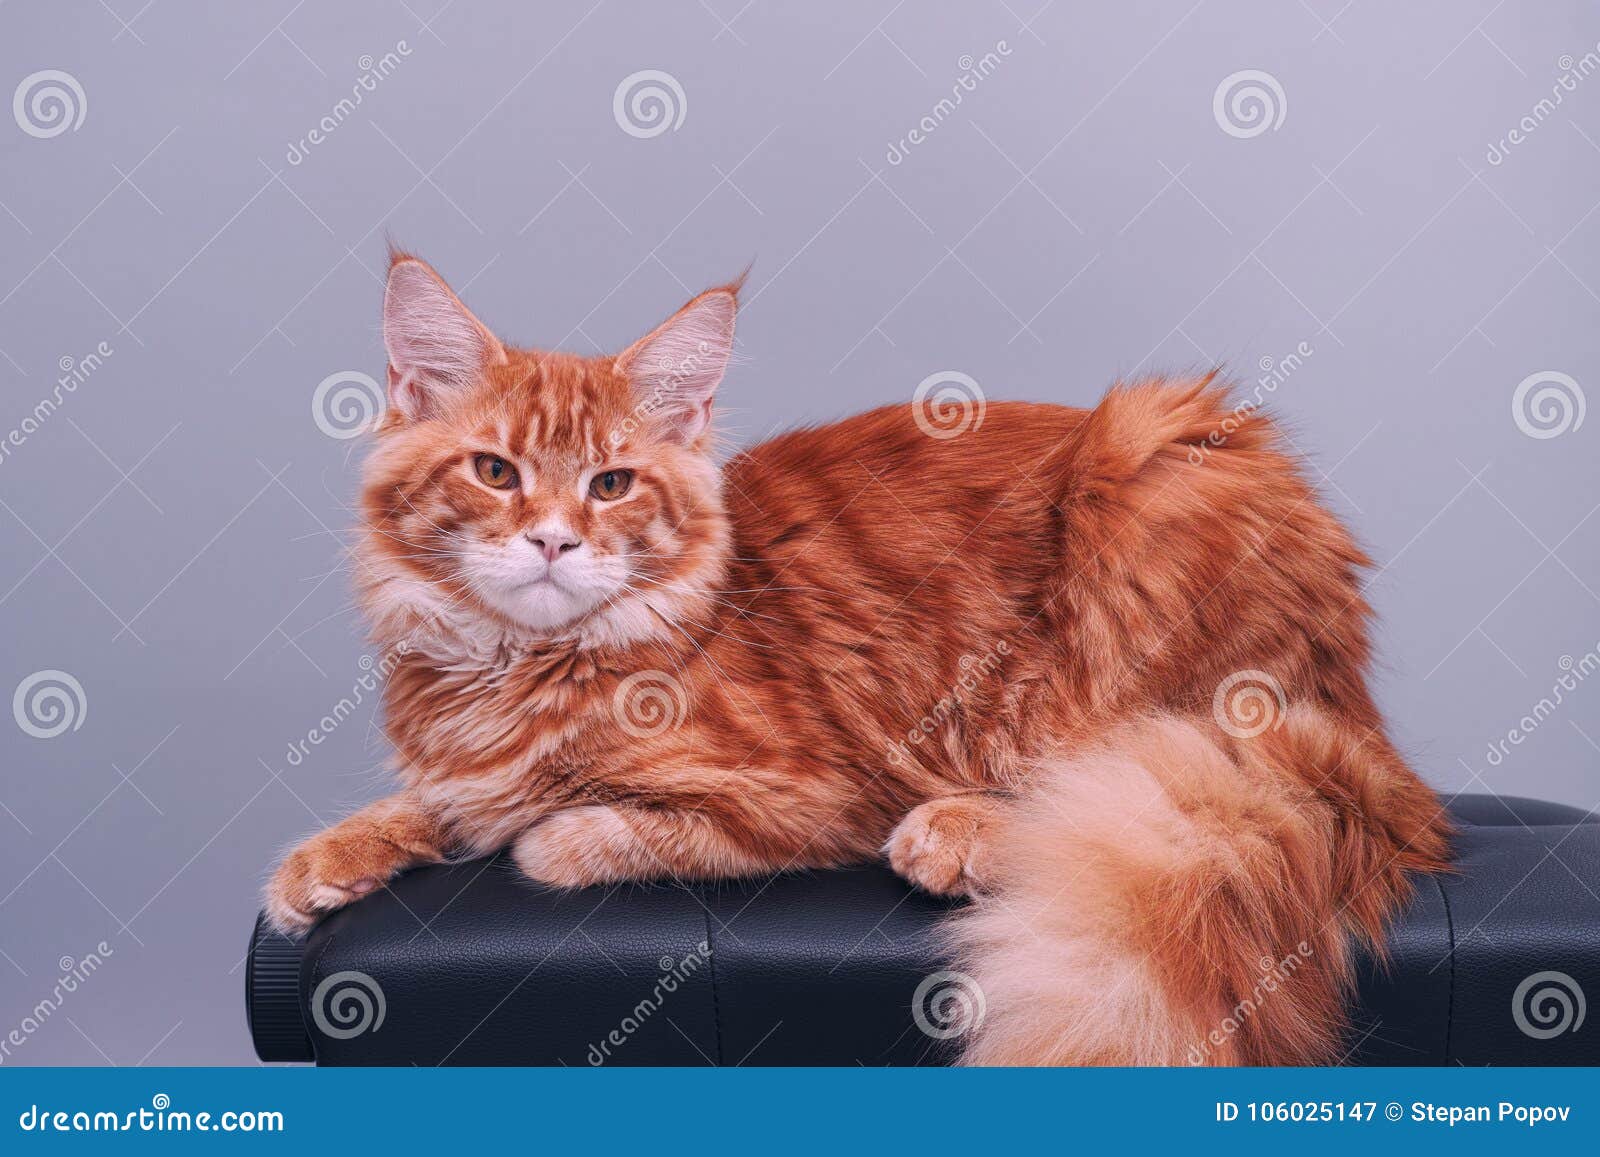 Red Maine Coon Cat on a Grey Background Looking at Camera Stock Image ...